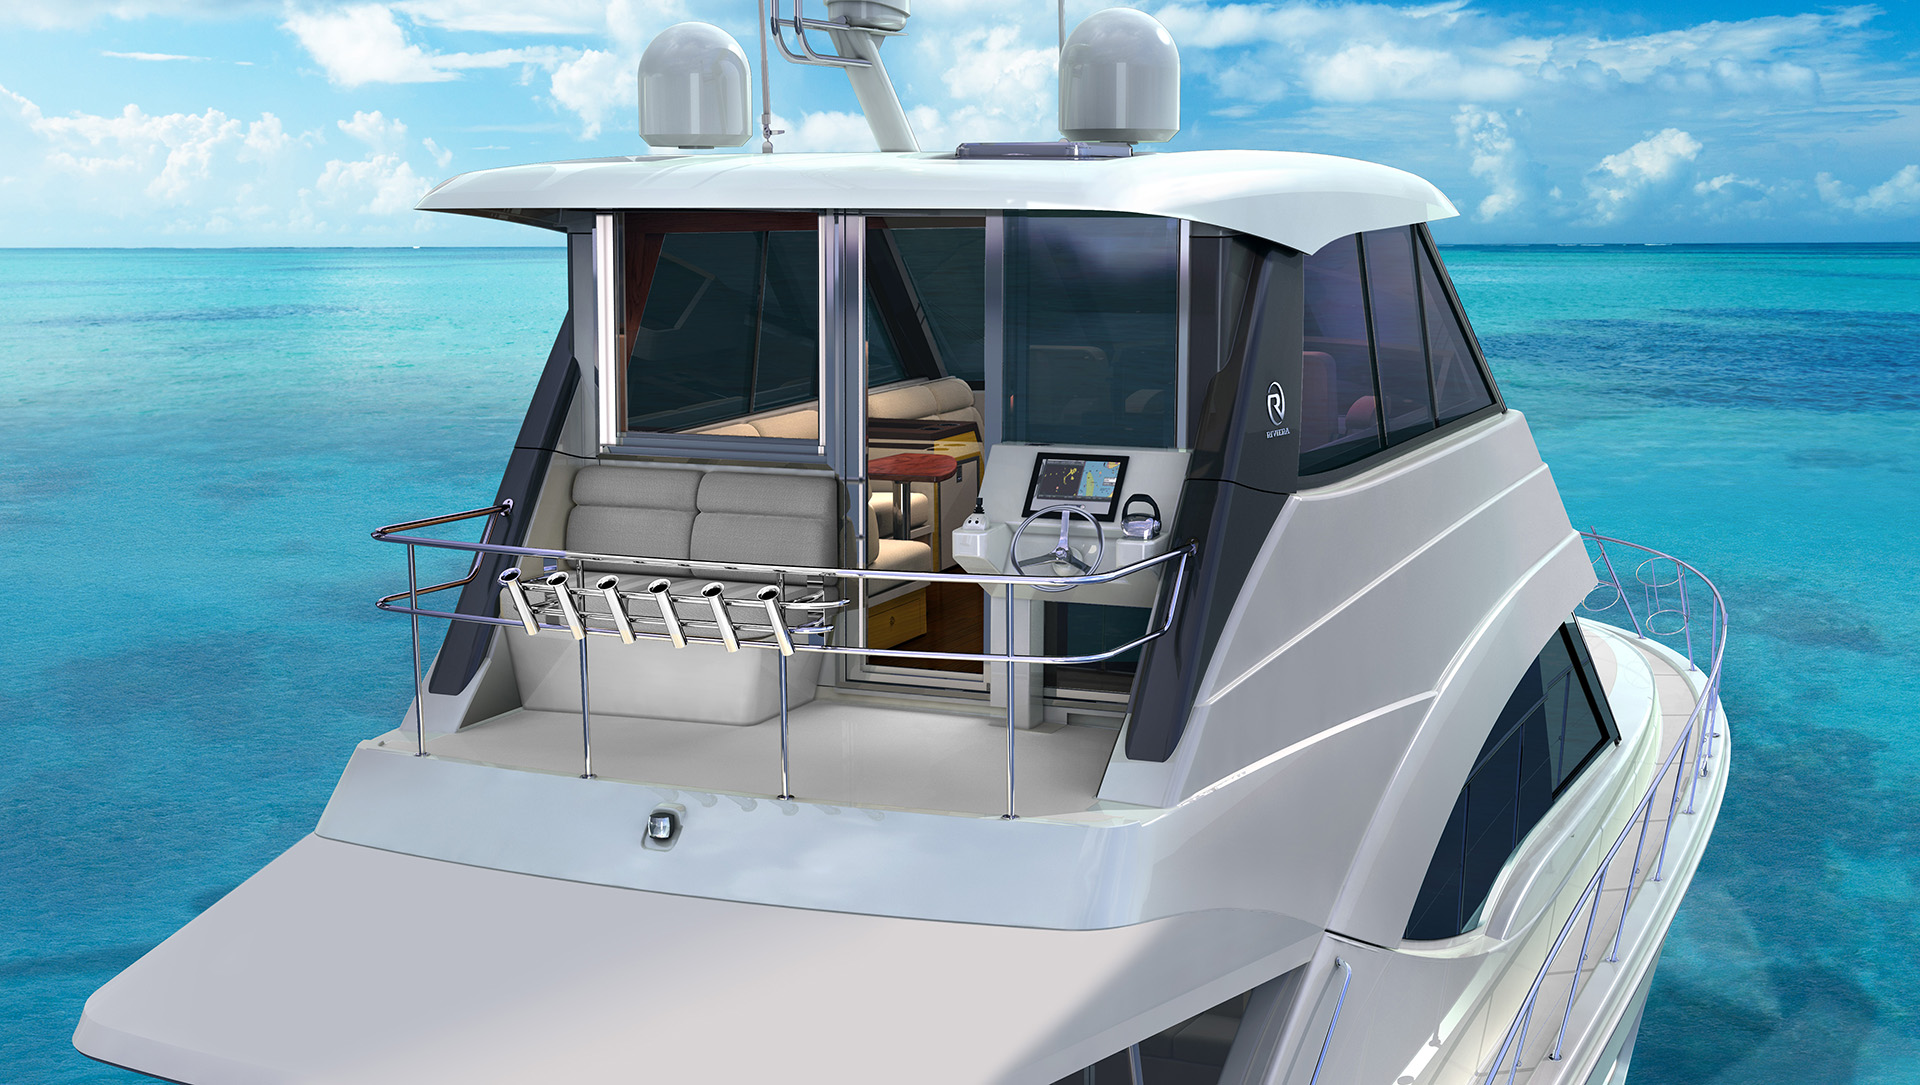 The fully enclosed flybridge of the 57 features an ultramodern helm, stylish sky lounge and rear deck with aft docking station-2